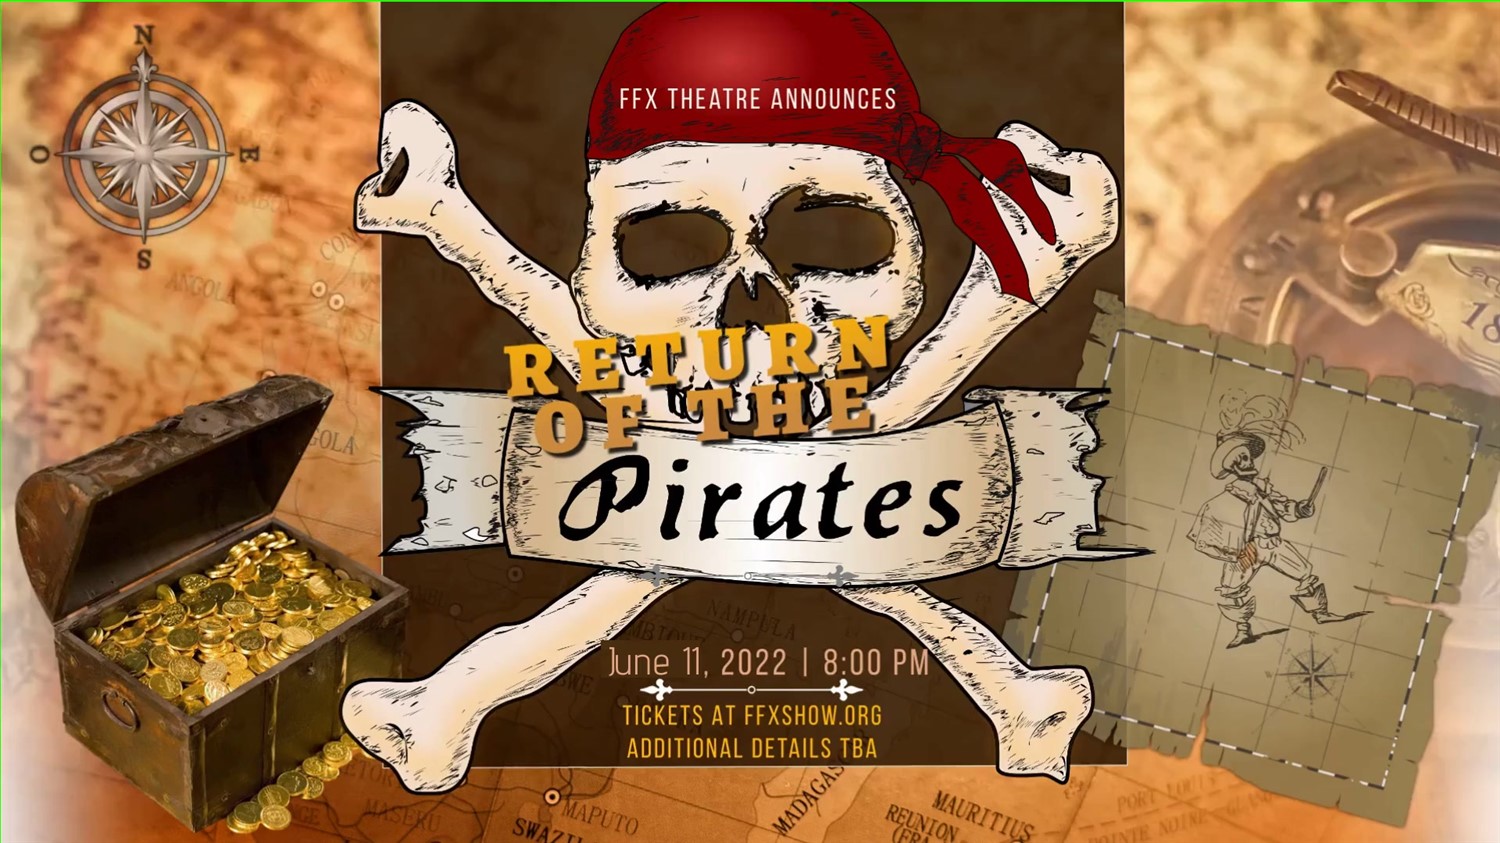 Return of the Pirates to FFX Sneaky Sneak Peek Weekend! on Jun 11, 20:00@FFX Theatre - Pick a seat, Buy tickets and Get information on Family Fun Xperience tickets.ffxshow.org